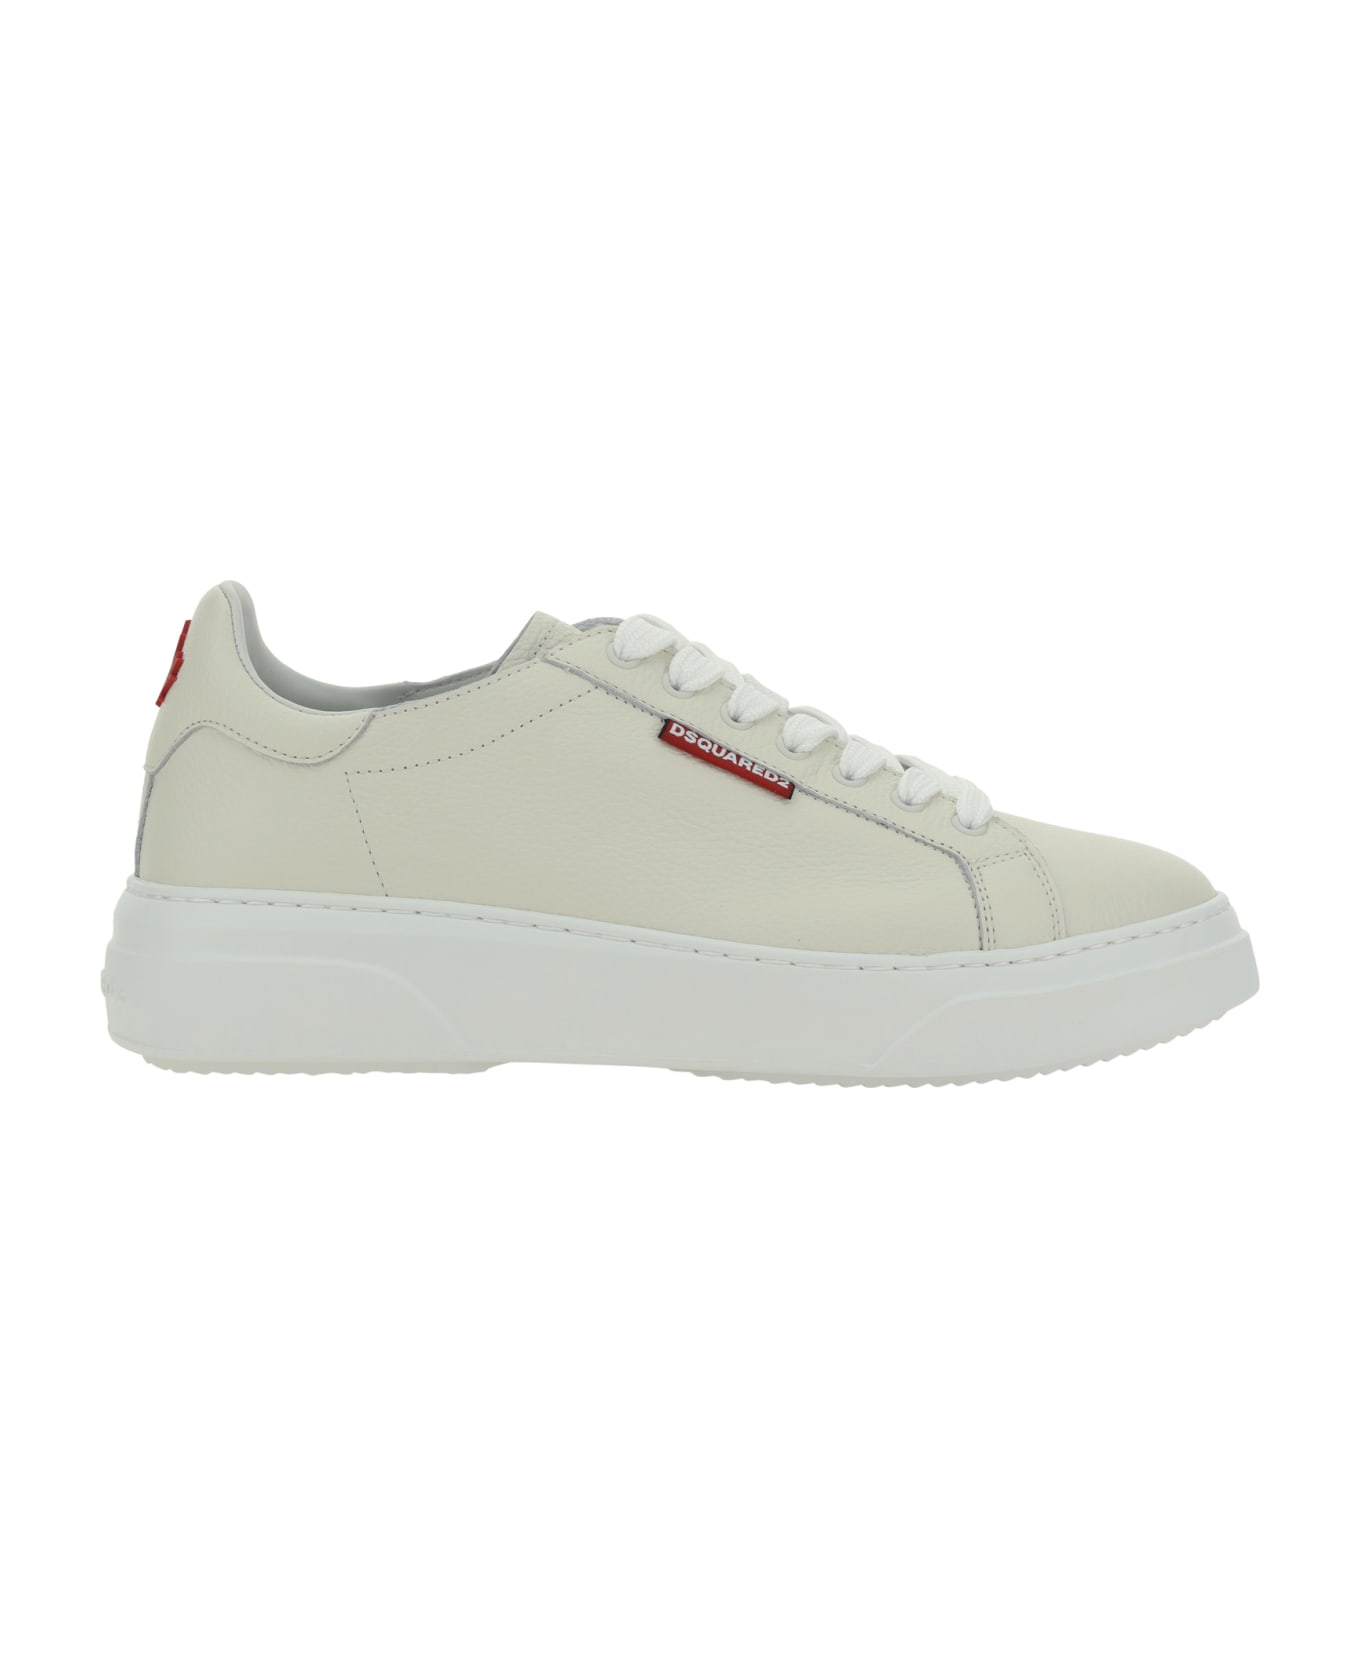 Dsquared2 Sneakers - Panna スニーカー